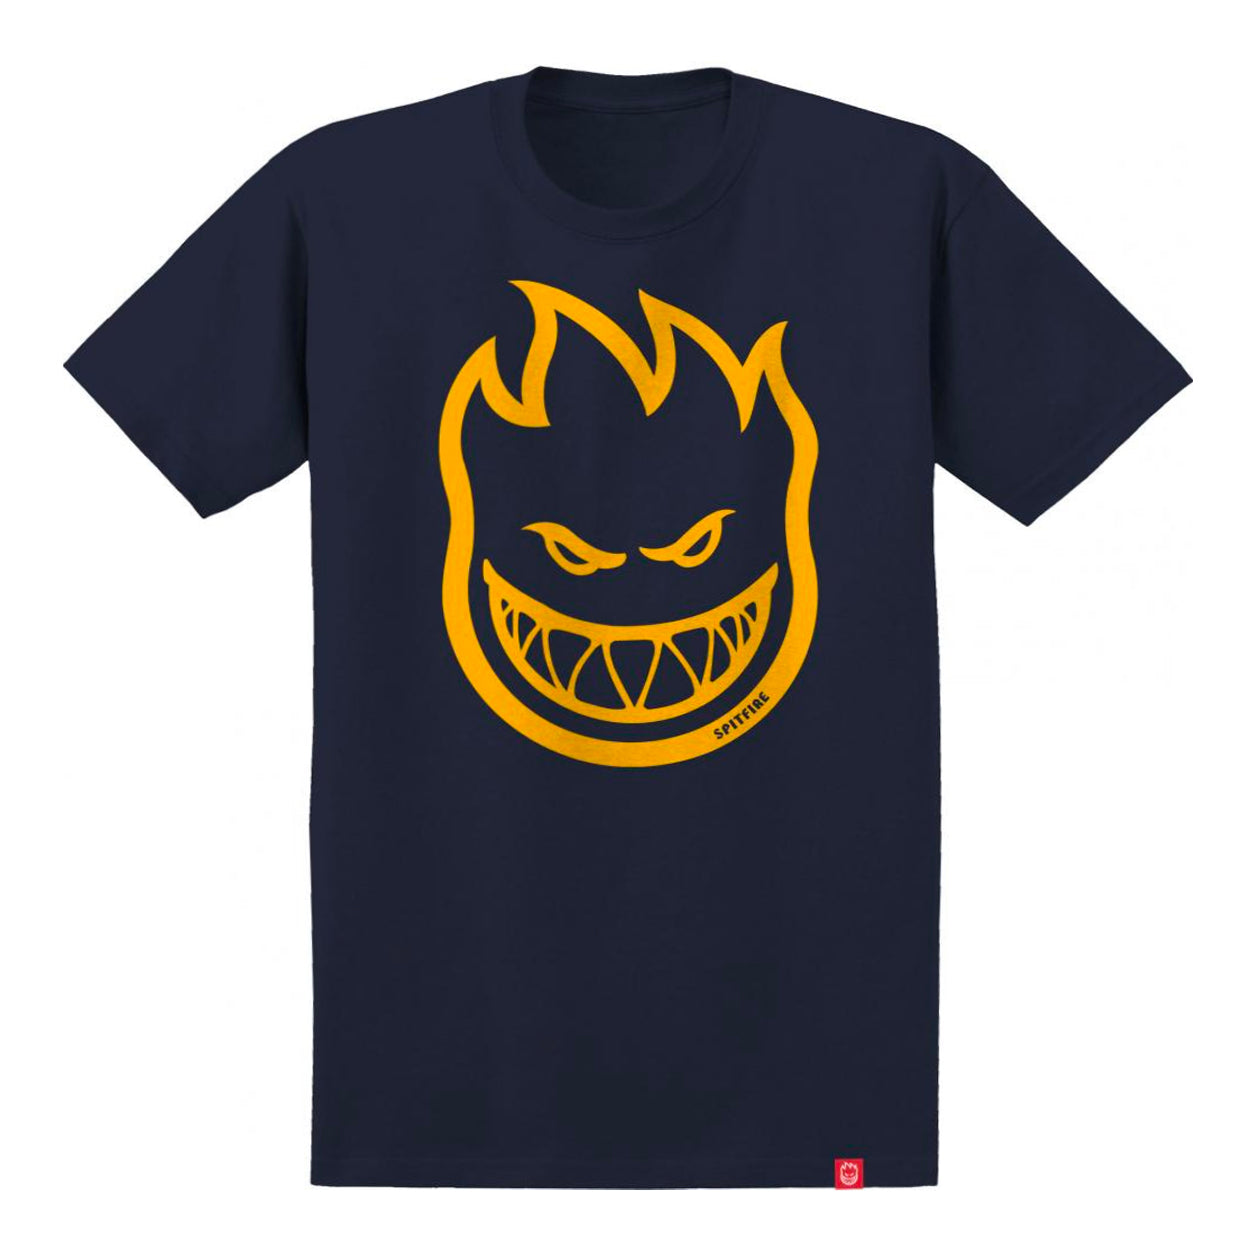 Spitfire Bighead T Shirt - Navy / Gold - Prime Delux Store